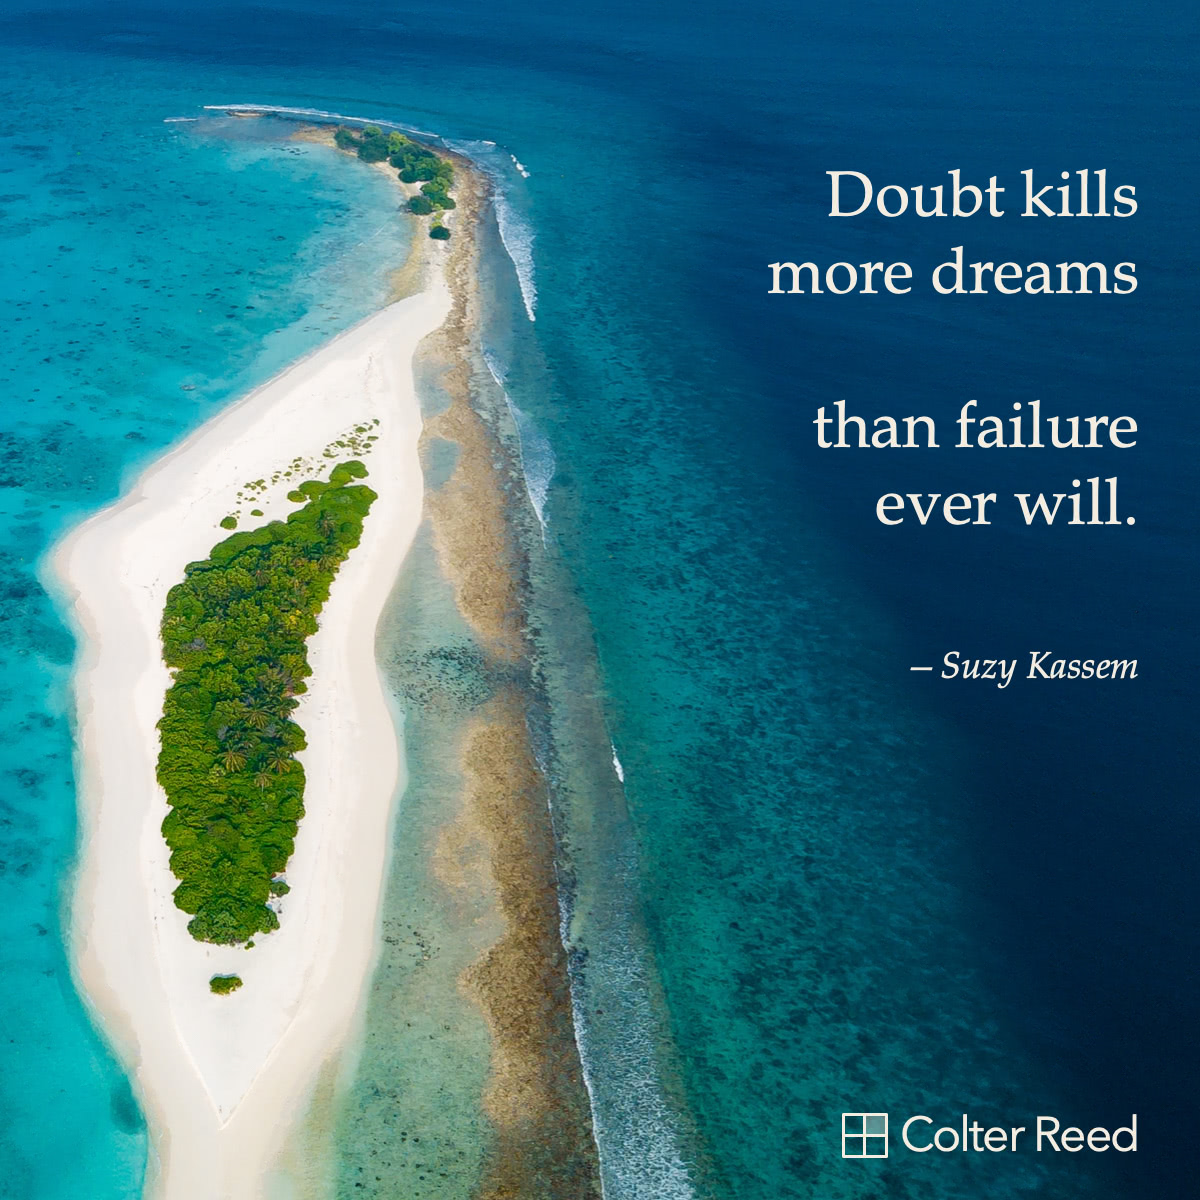 Doubt kills more dreams than failure ever will. —Suzy Kassem